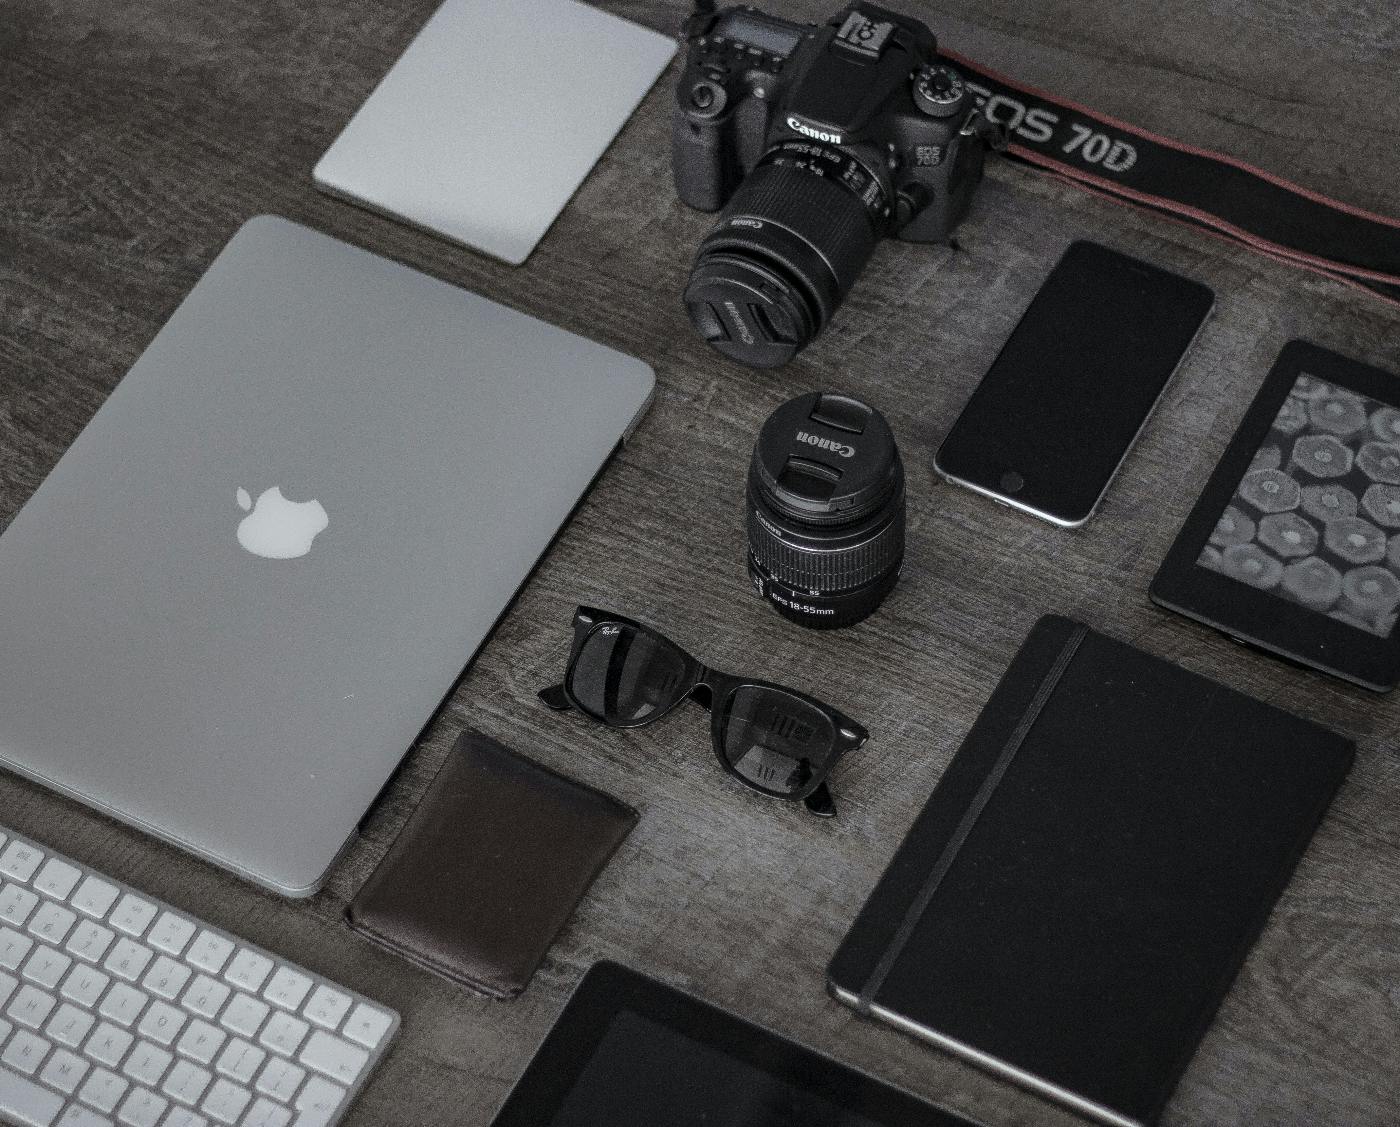 A table with a Macbook. Cannon camera and lens, iPhone, iPad, Raybans, moleskine and a wallet on it